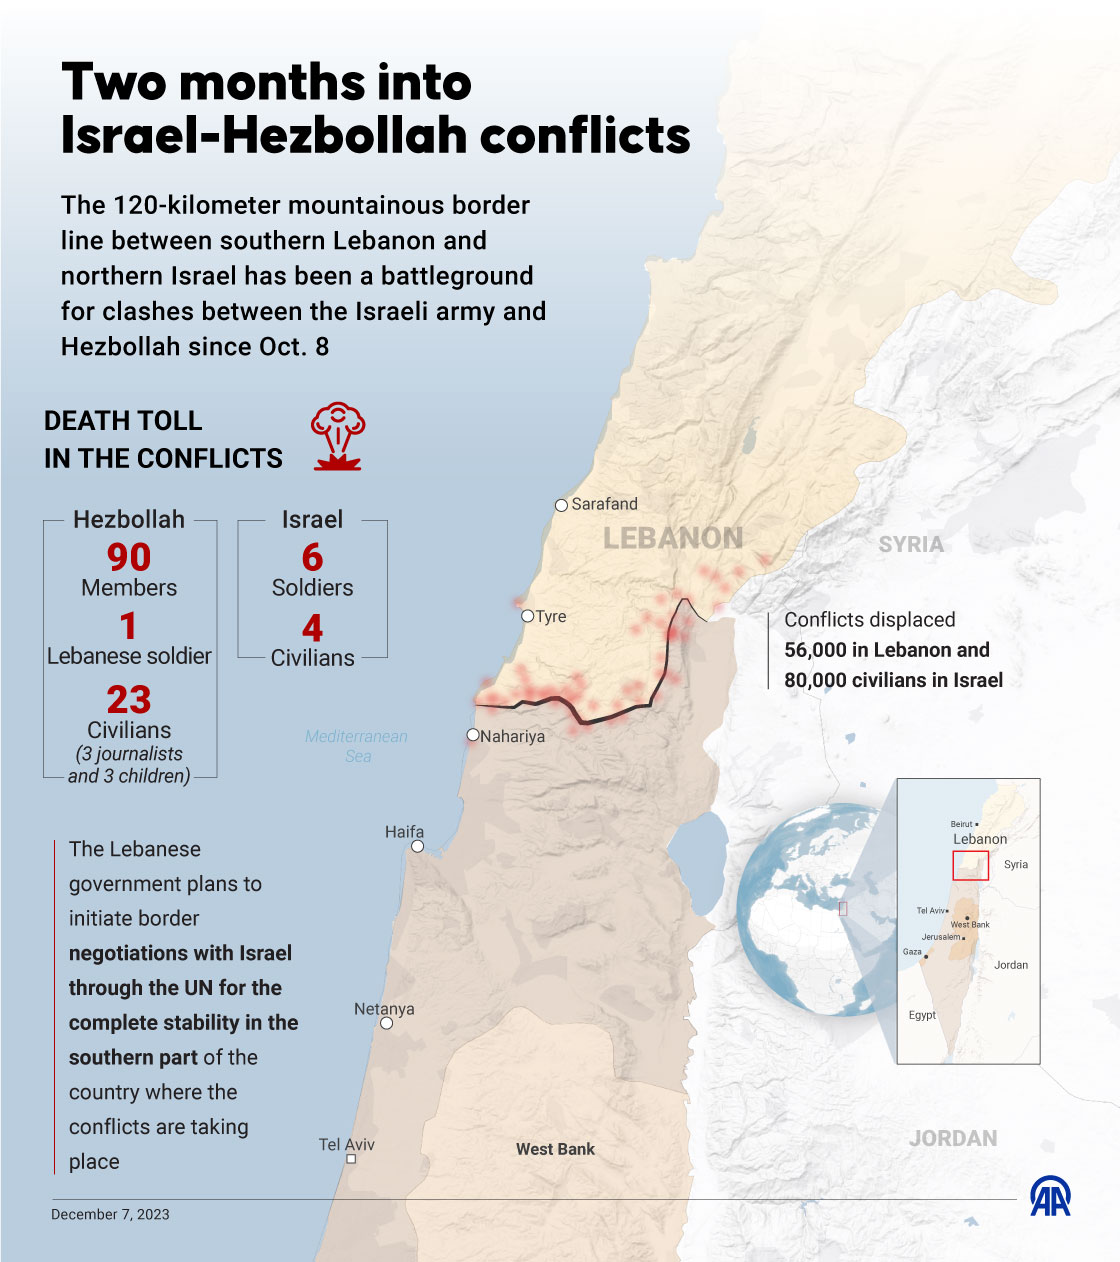 Two months into israel-hezbollah conflicts